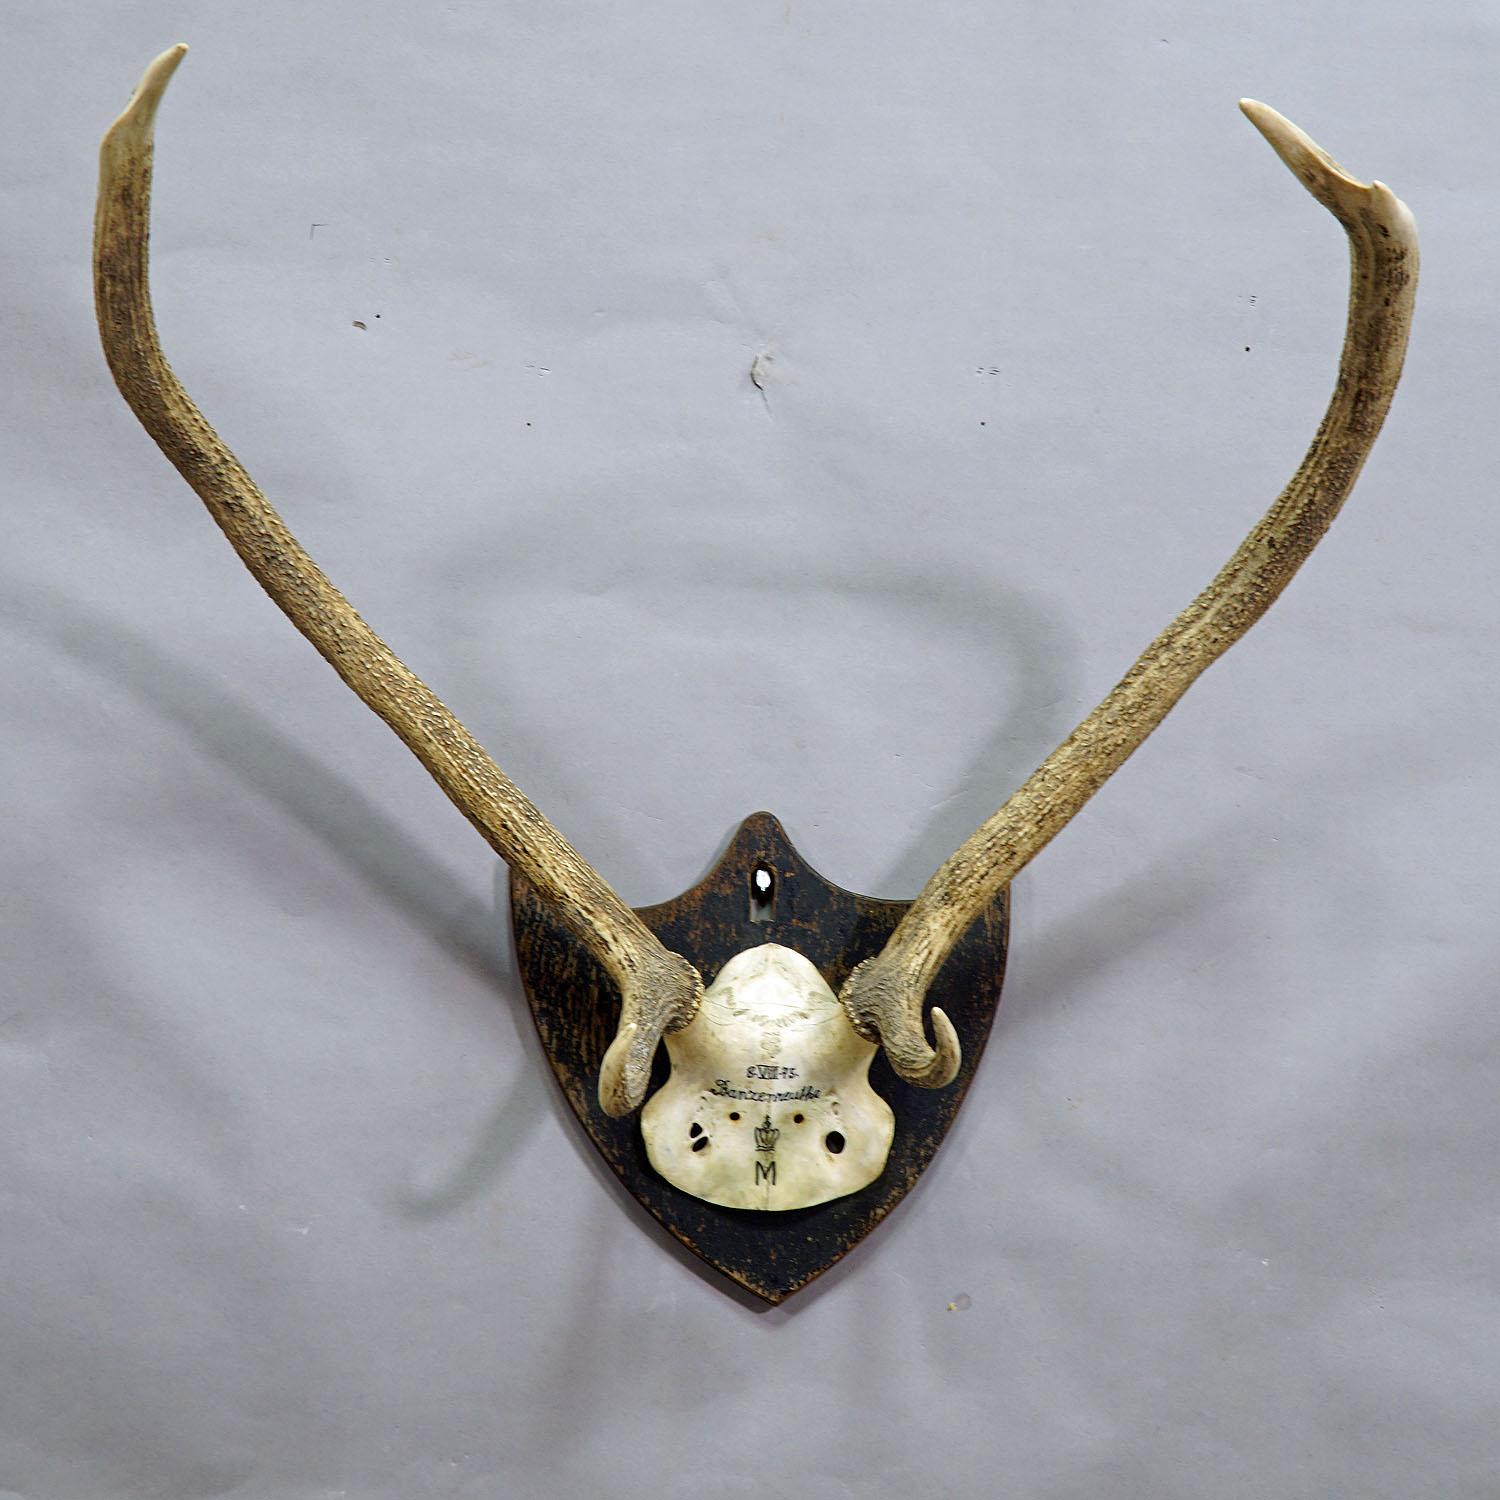 A 6 pointer Black Forest deer trophy from the palace of salem in South Germany. shoot by a member of the lordly family of Baden in 1875. handwritten inscriptions on the skull with, place of the hunt, family crest and date. mounted on a nice